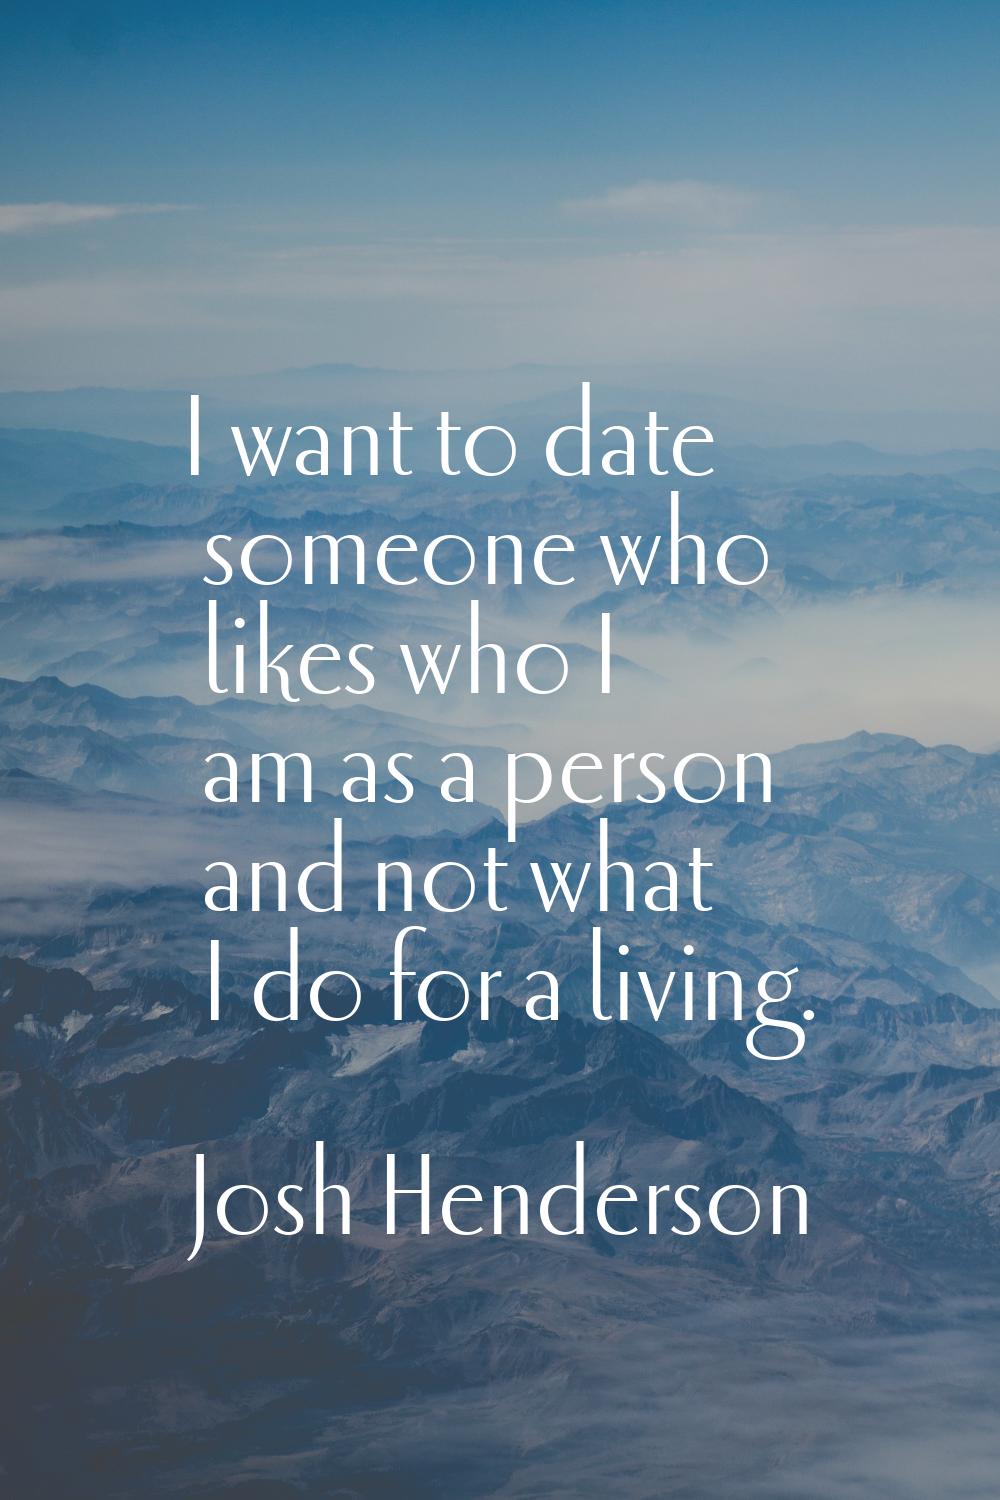 I want to date someone who likes who I am as a person and not what I do for a living.